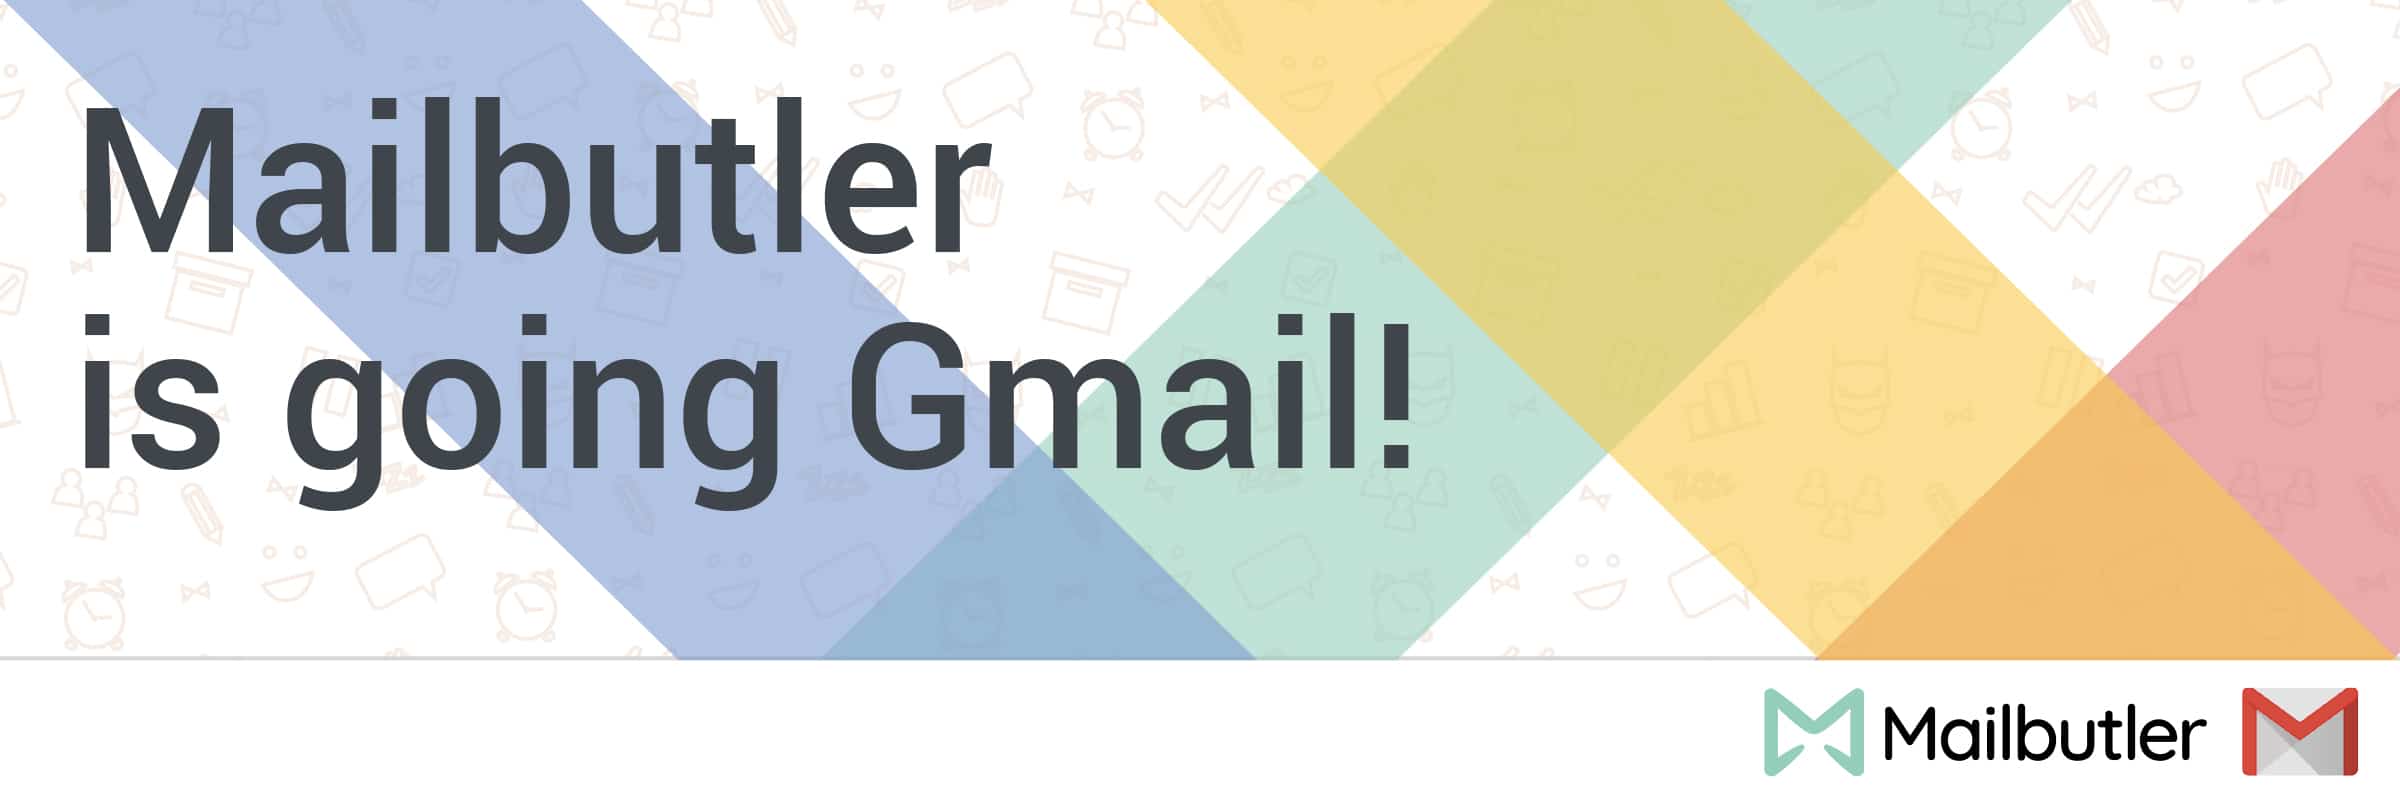 Mailbutler is bringing its inbox-enhancing email plugin to Gmail.